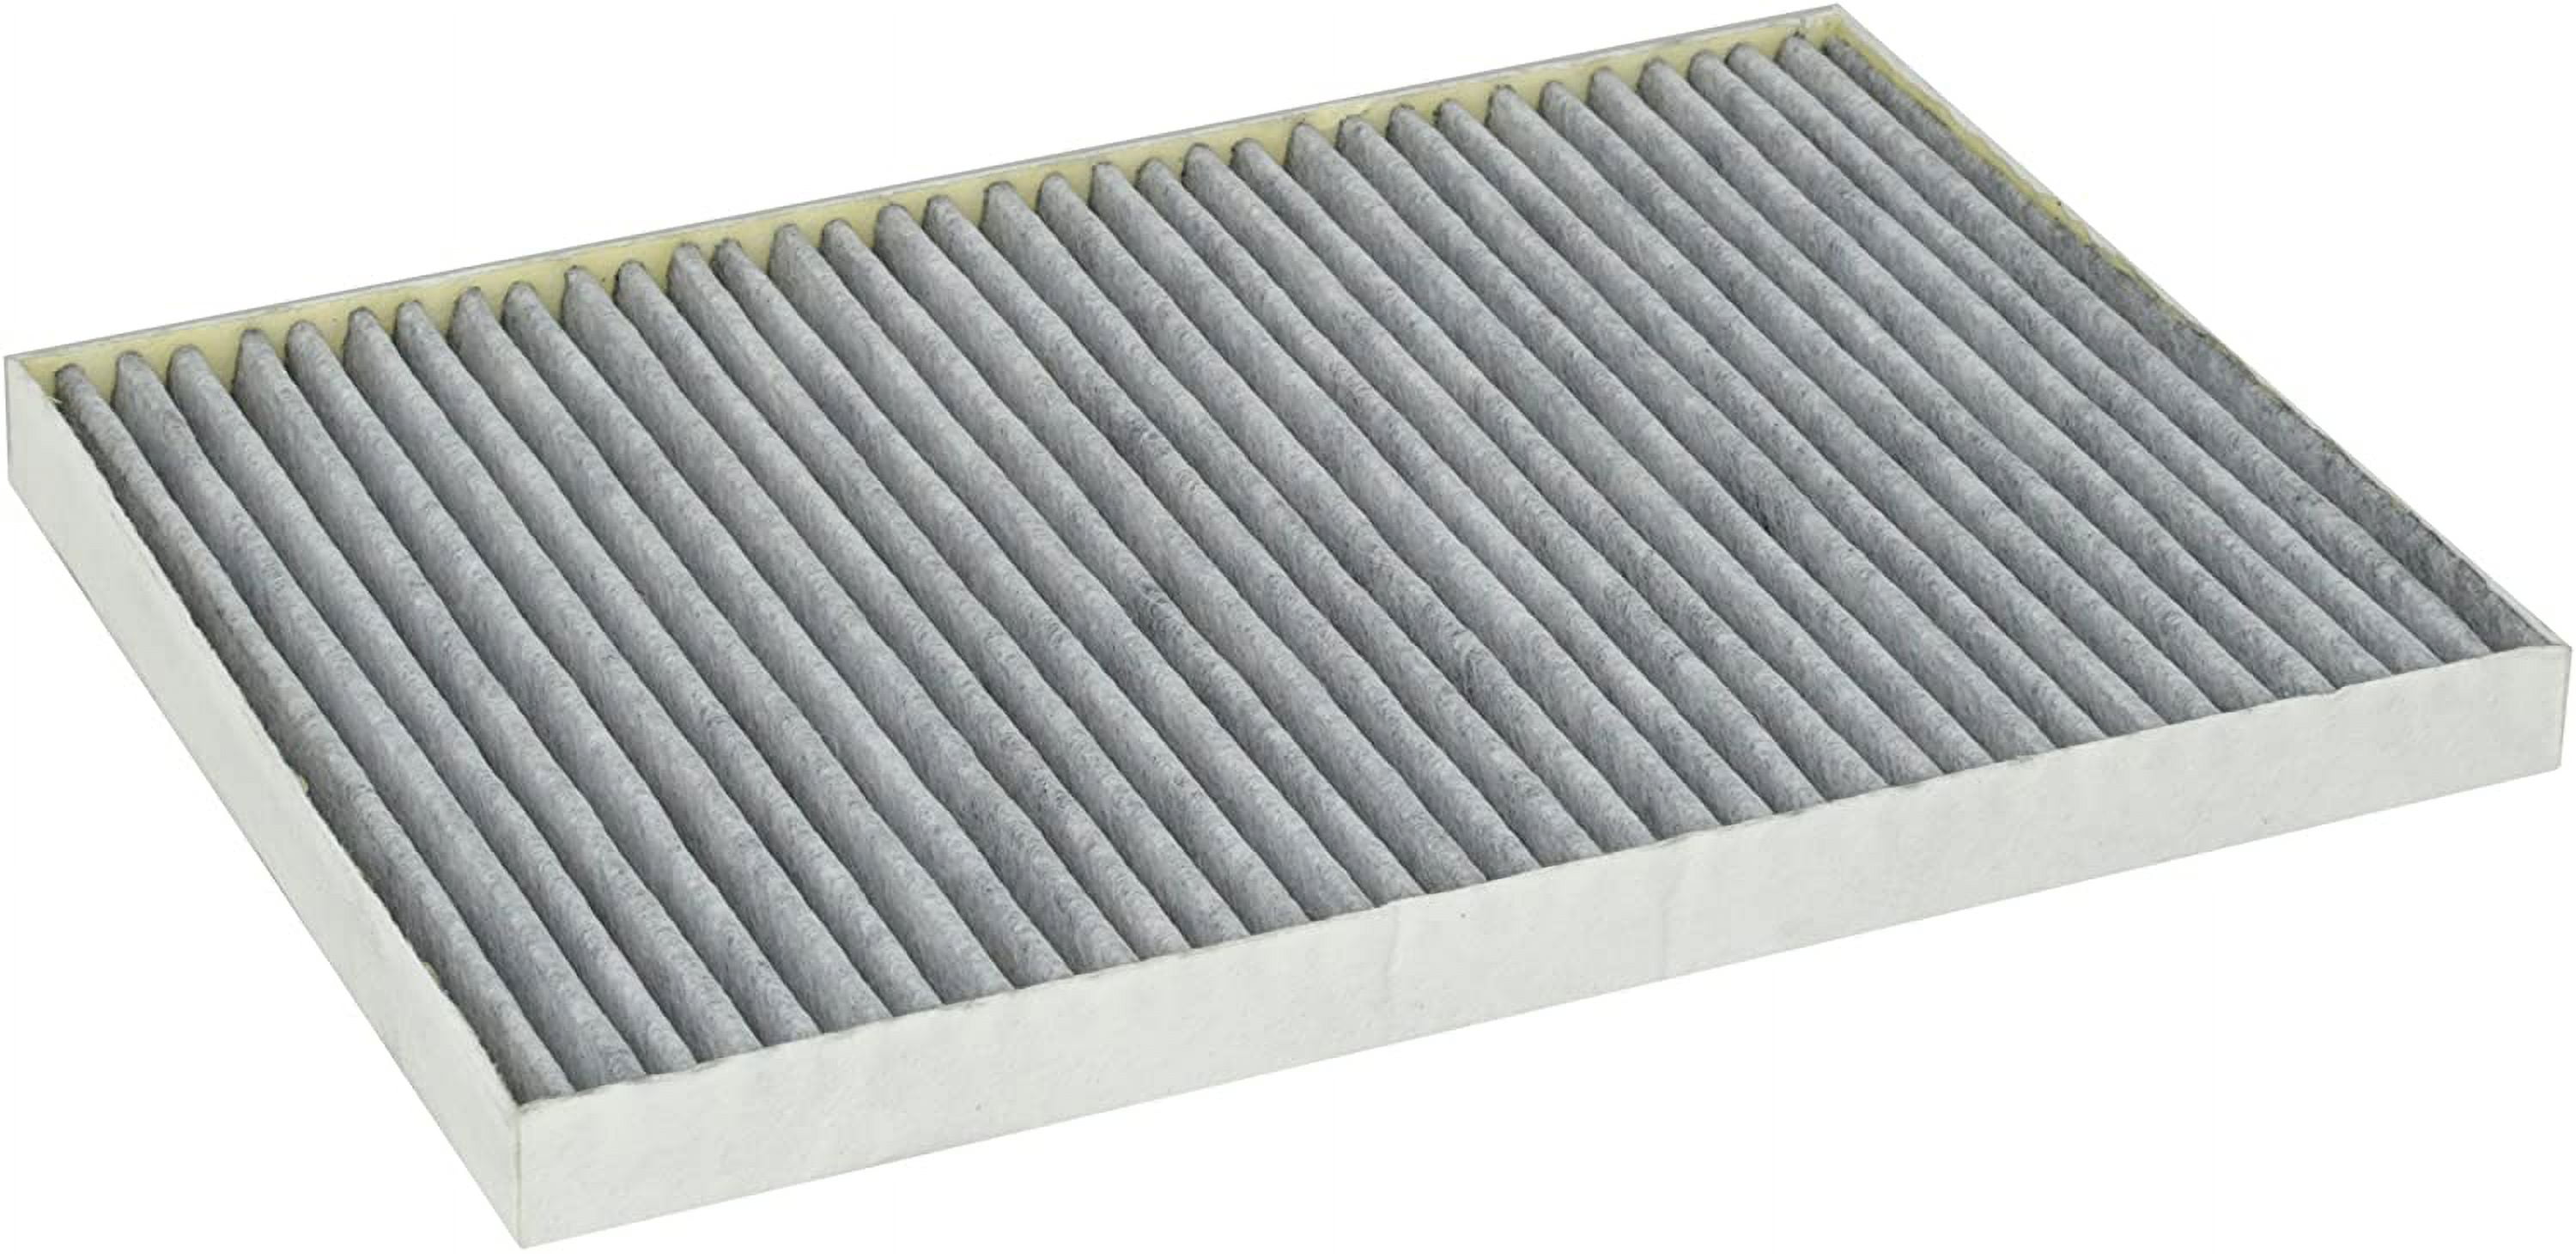 ACDelco Gold Cabin Air Filter, Activated Charcoal Fits select: 2009-2017  CHEVROLET TRAVERSE, 2007-2016 GMC ACADIA